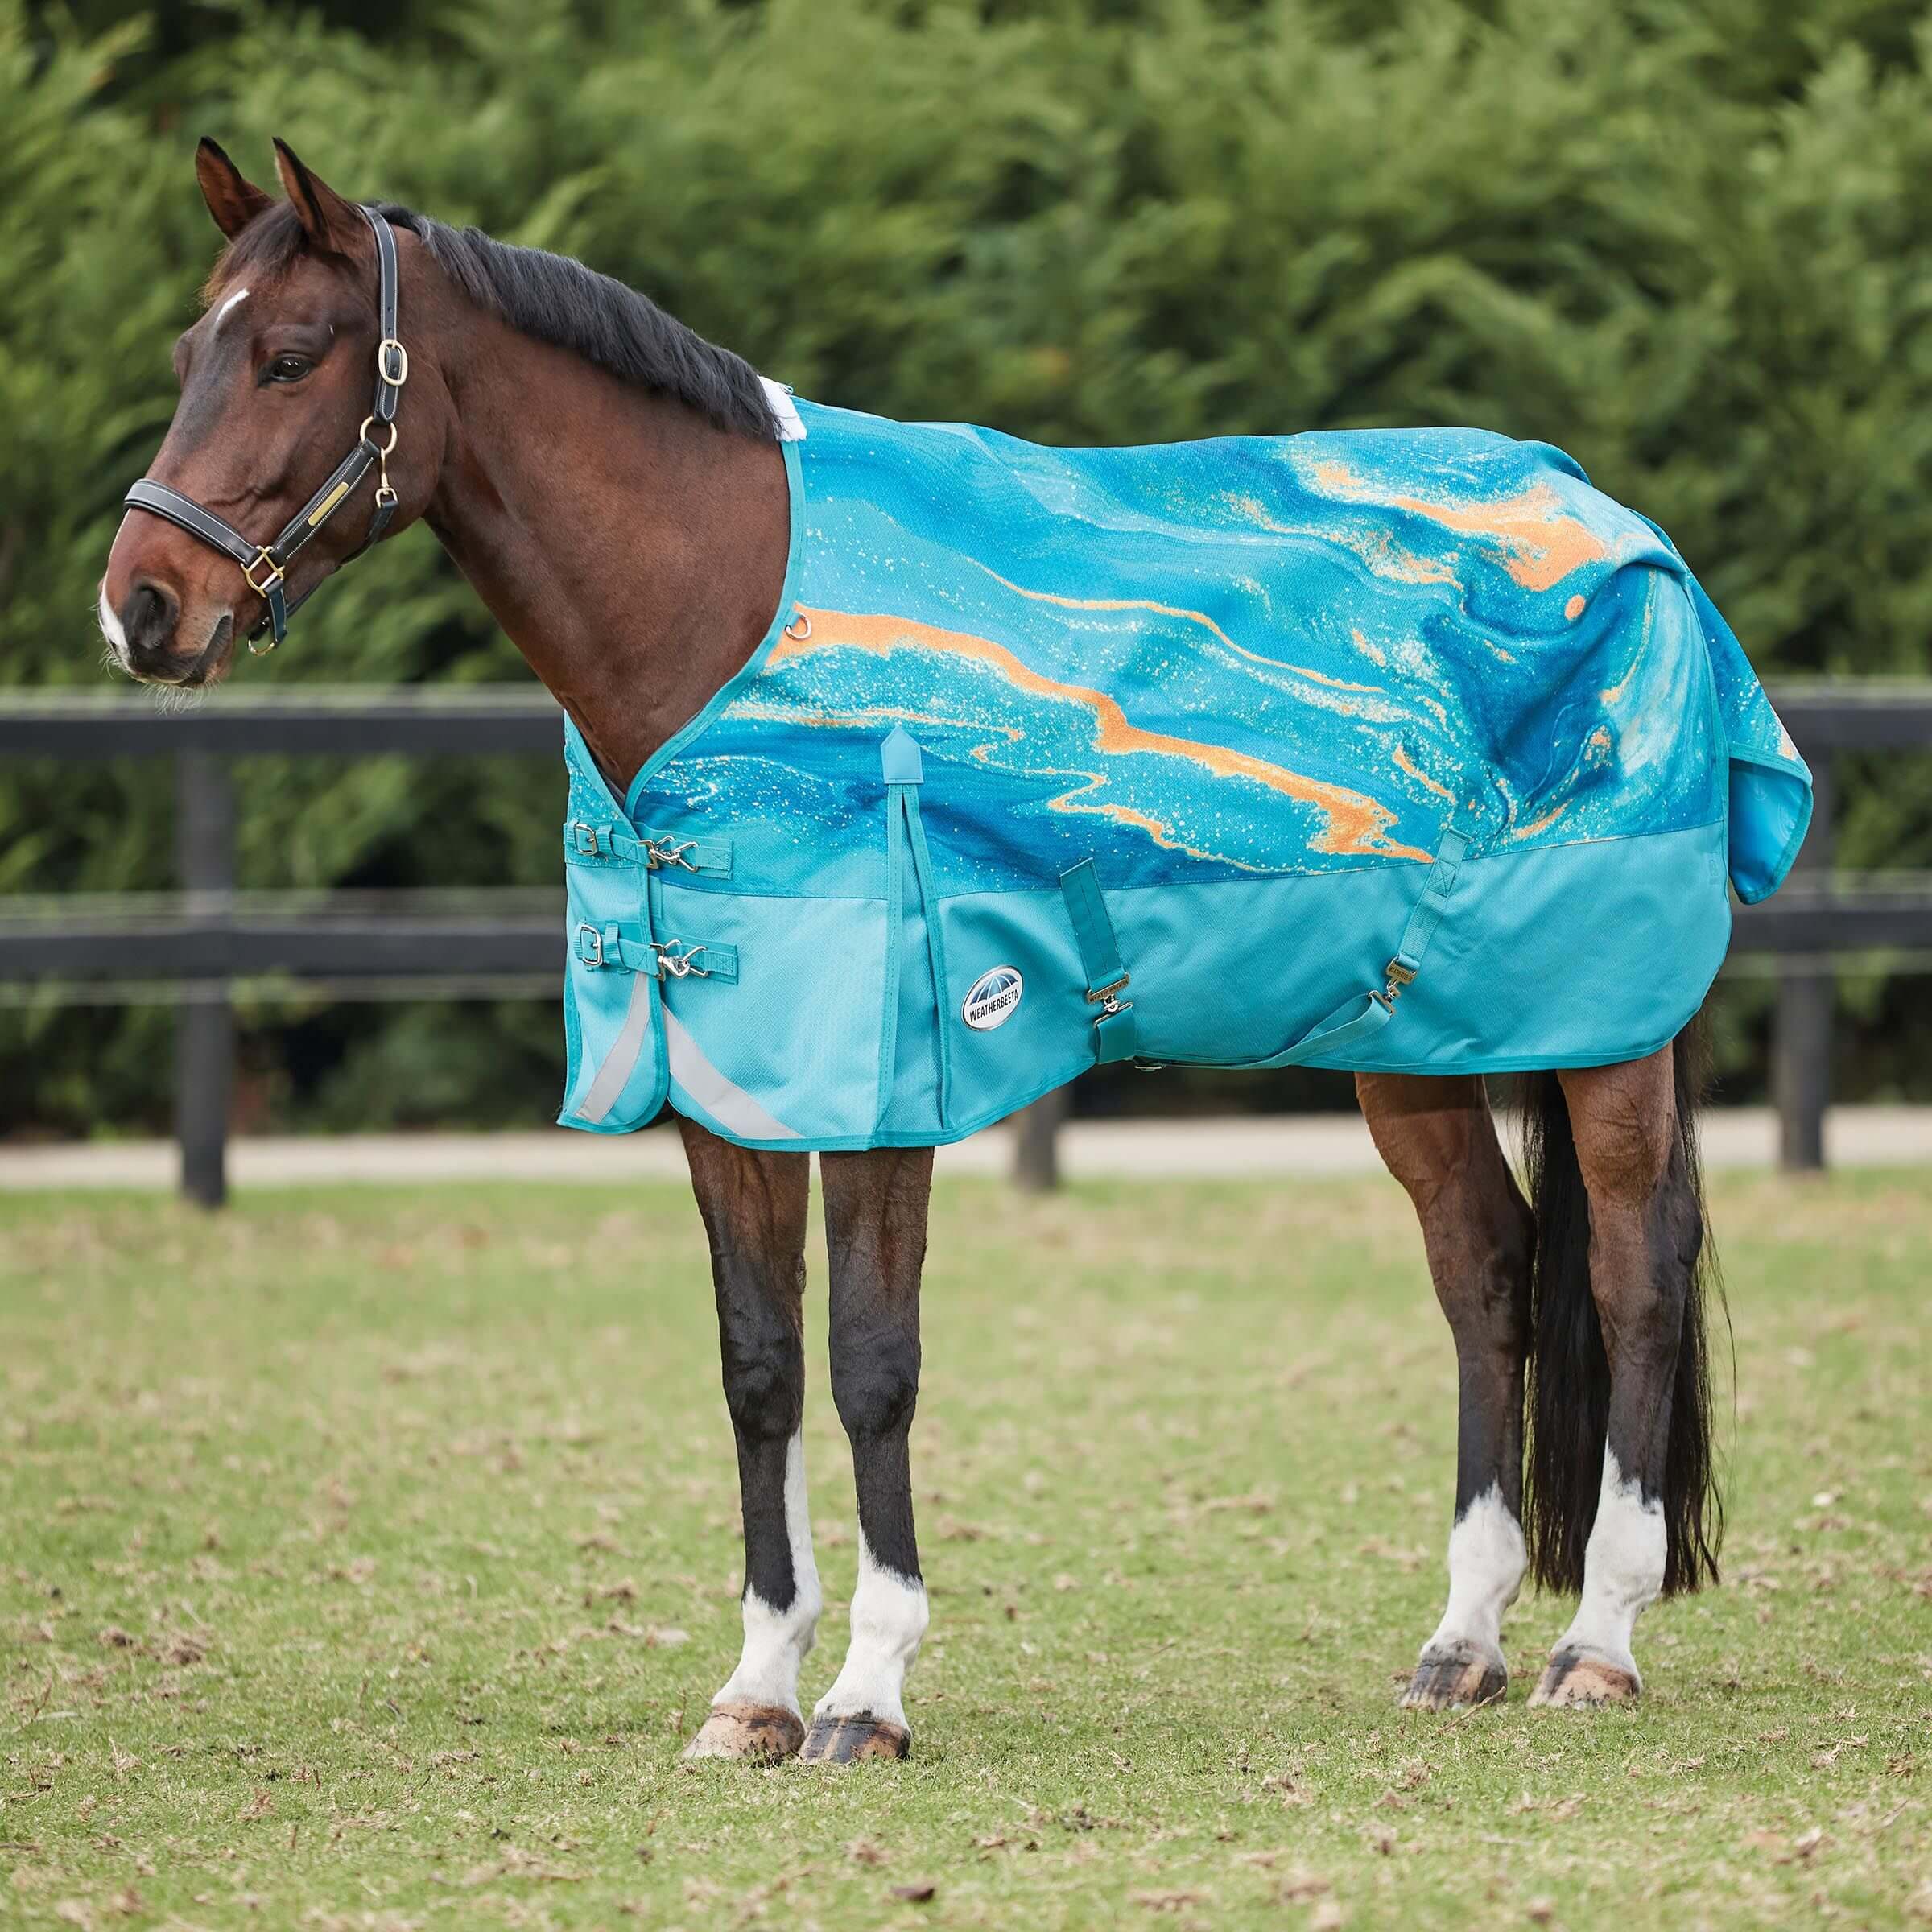 Our Top 10 Lightweight Horse Rugs: Top Picks and Everything You Need to Know